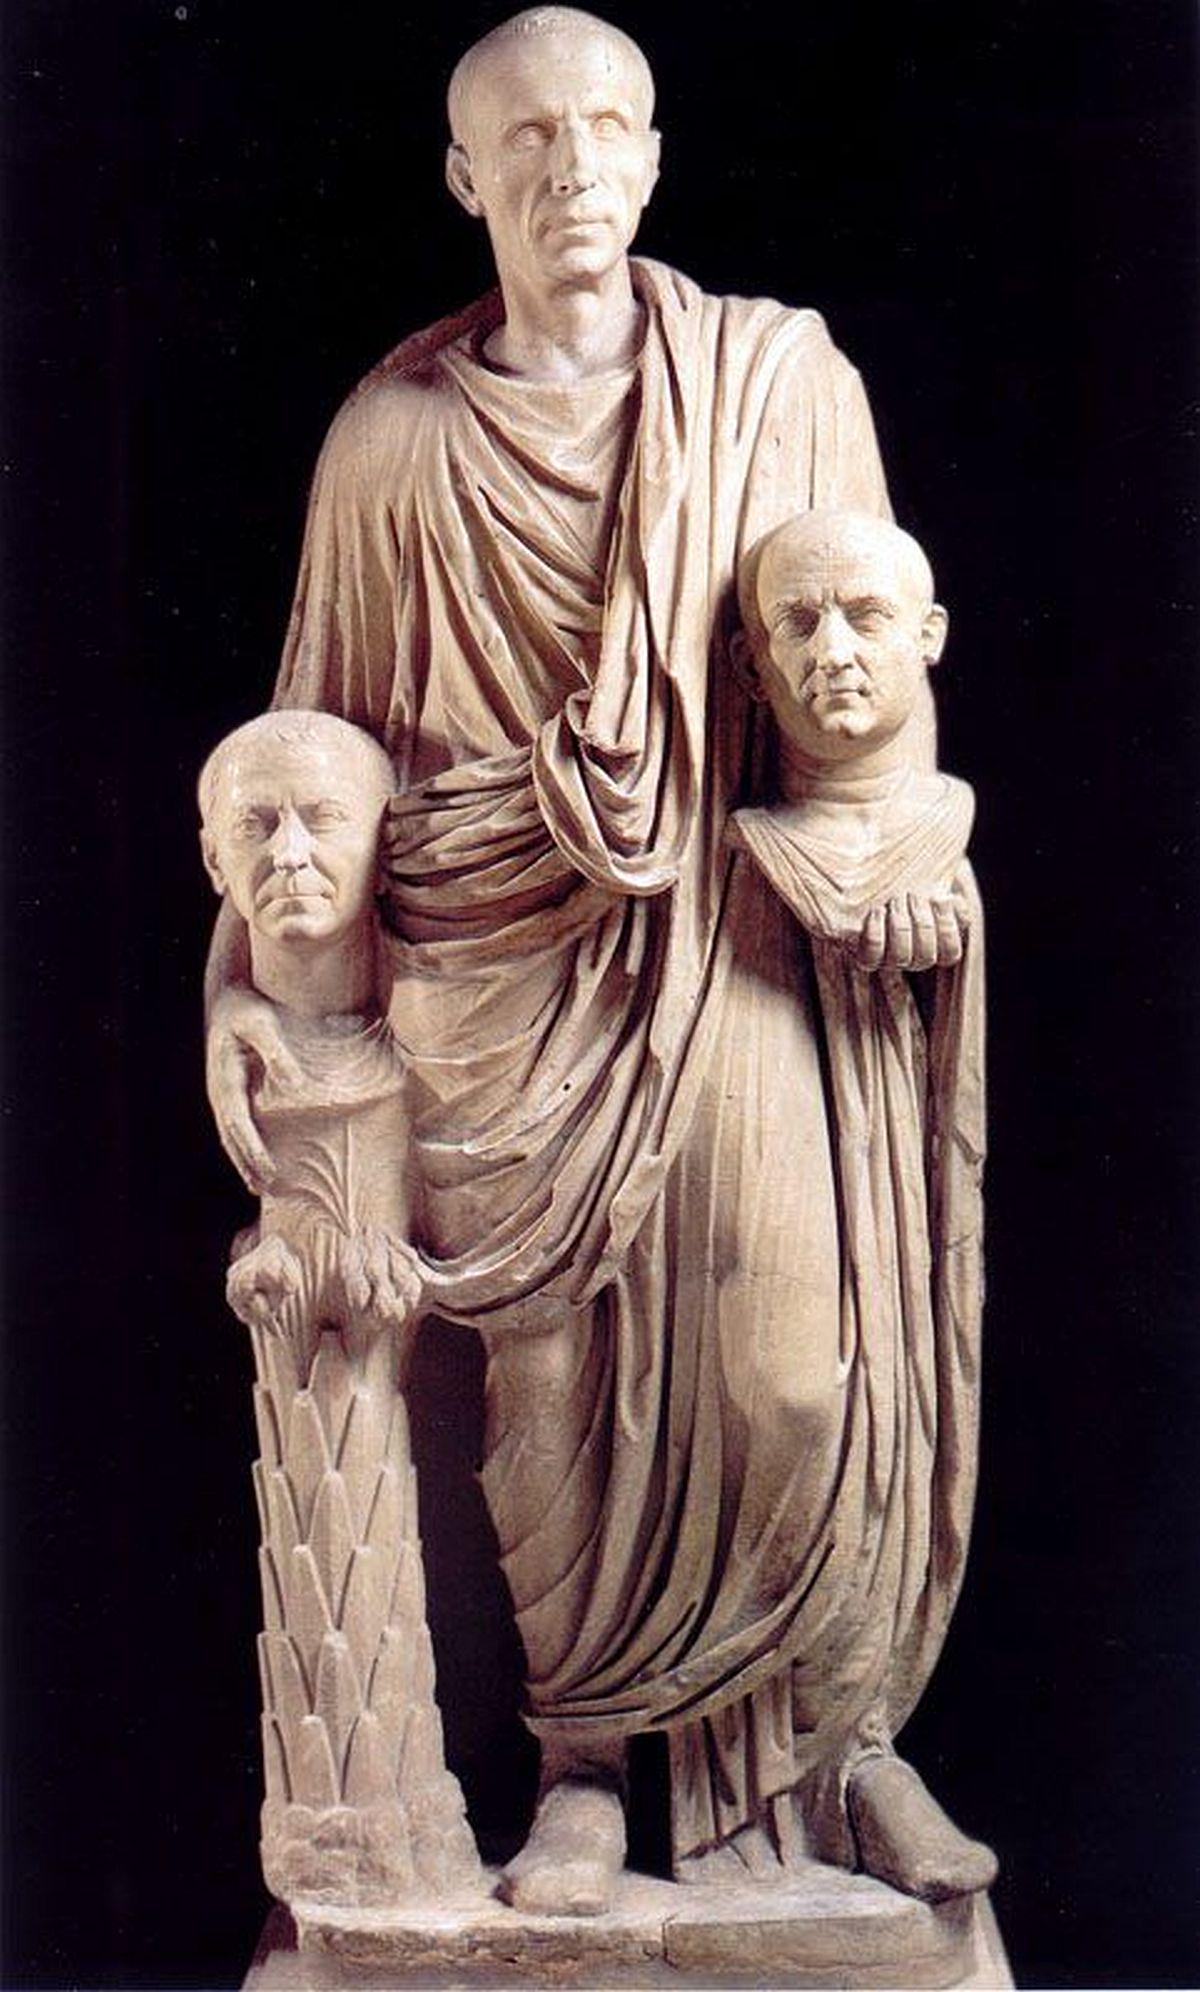 A statue of a Roman holding the busts of his ancestors, the so-called The Barberini statue is one of the main examples of Roman portrait sculpture mastery of the ancient period.jpeg